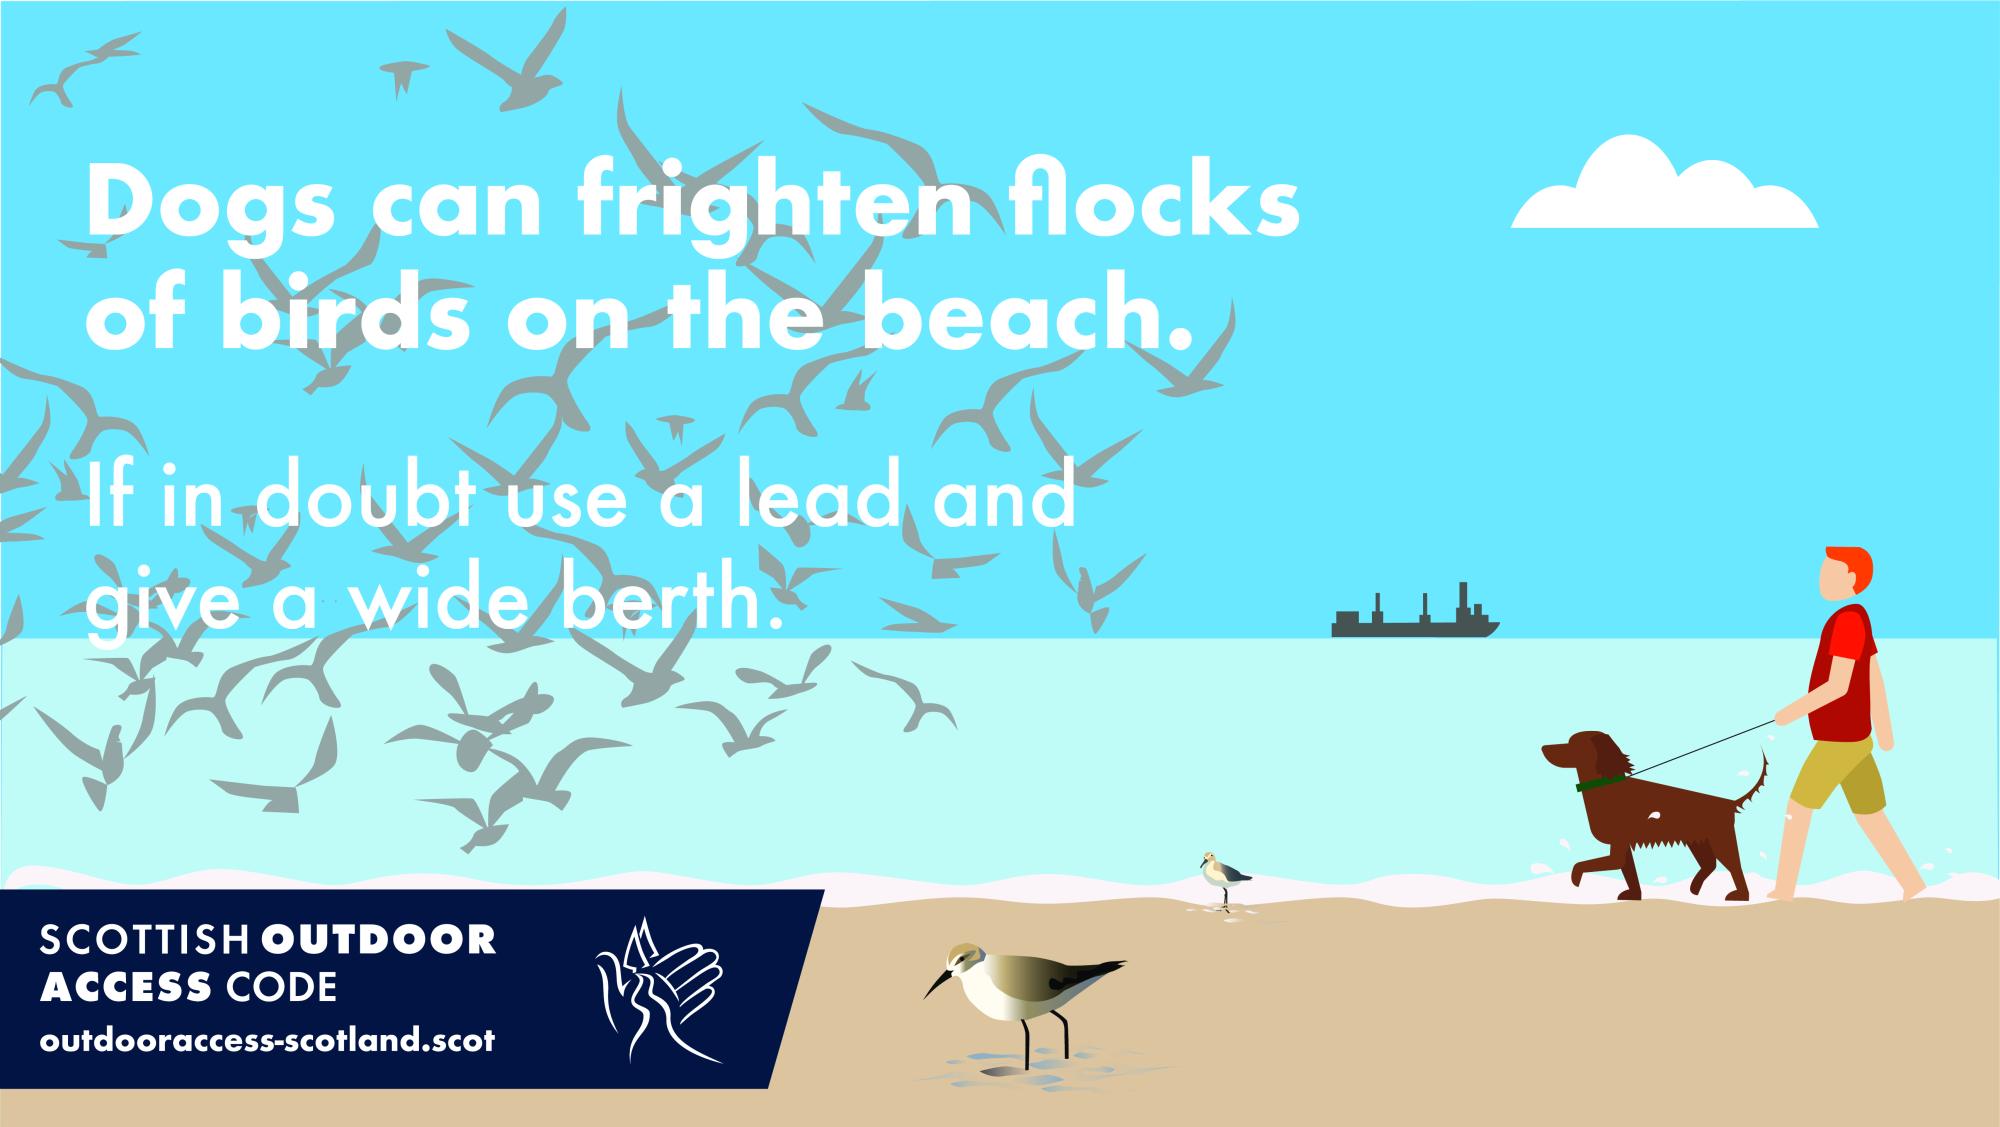 Dogs can frighten flocks of birds on the beach. If in doubt use a lead and give a wide berth. 